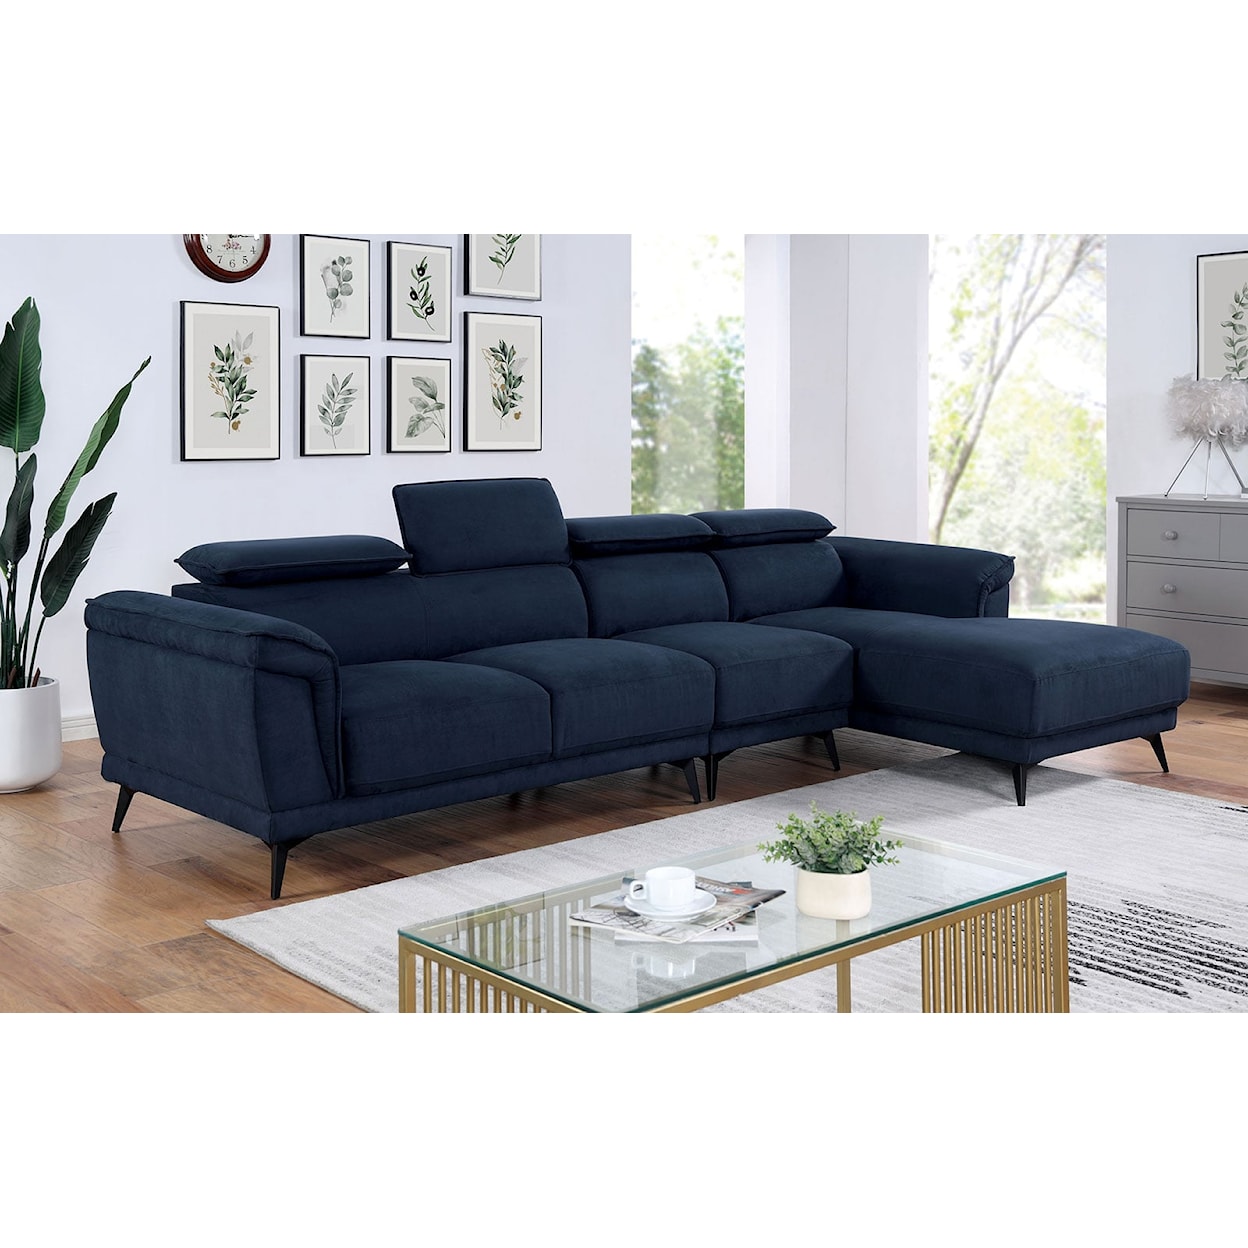 Furniture of America Napanee 3-Piece Sectional with Armless Chair, Navy